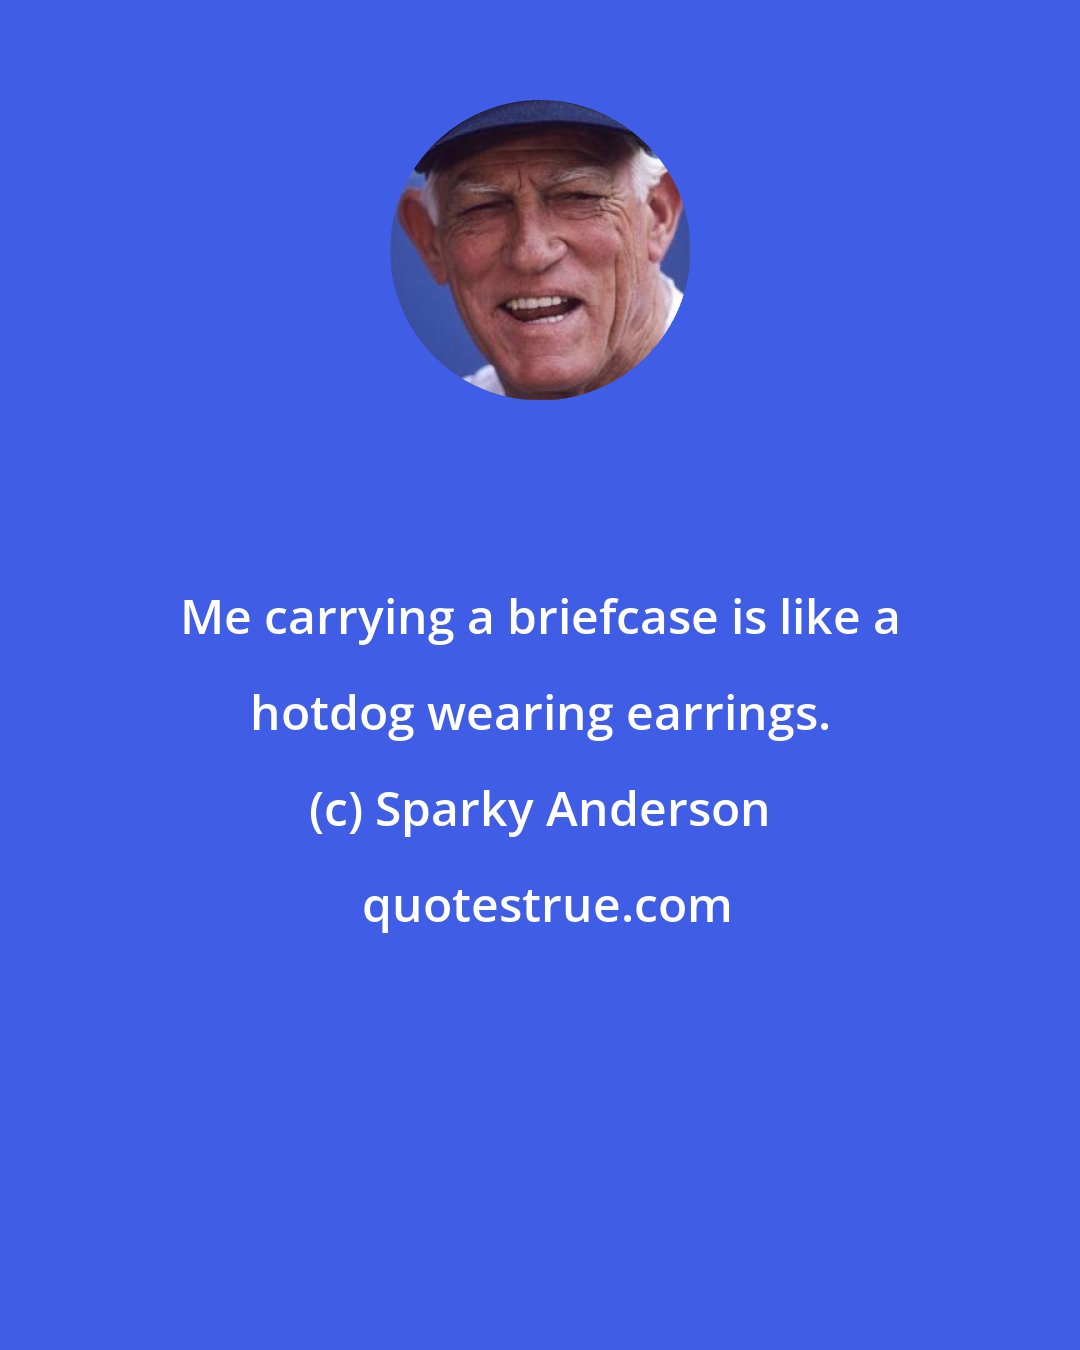 Sparky Anderson: Me carrying a briefcase is like a hotdog wearing earrings.